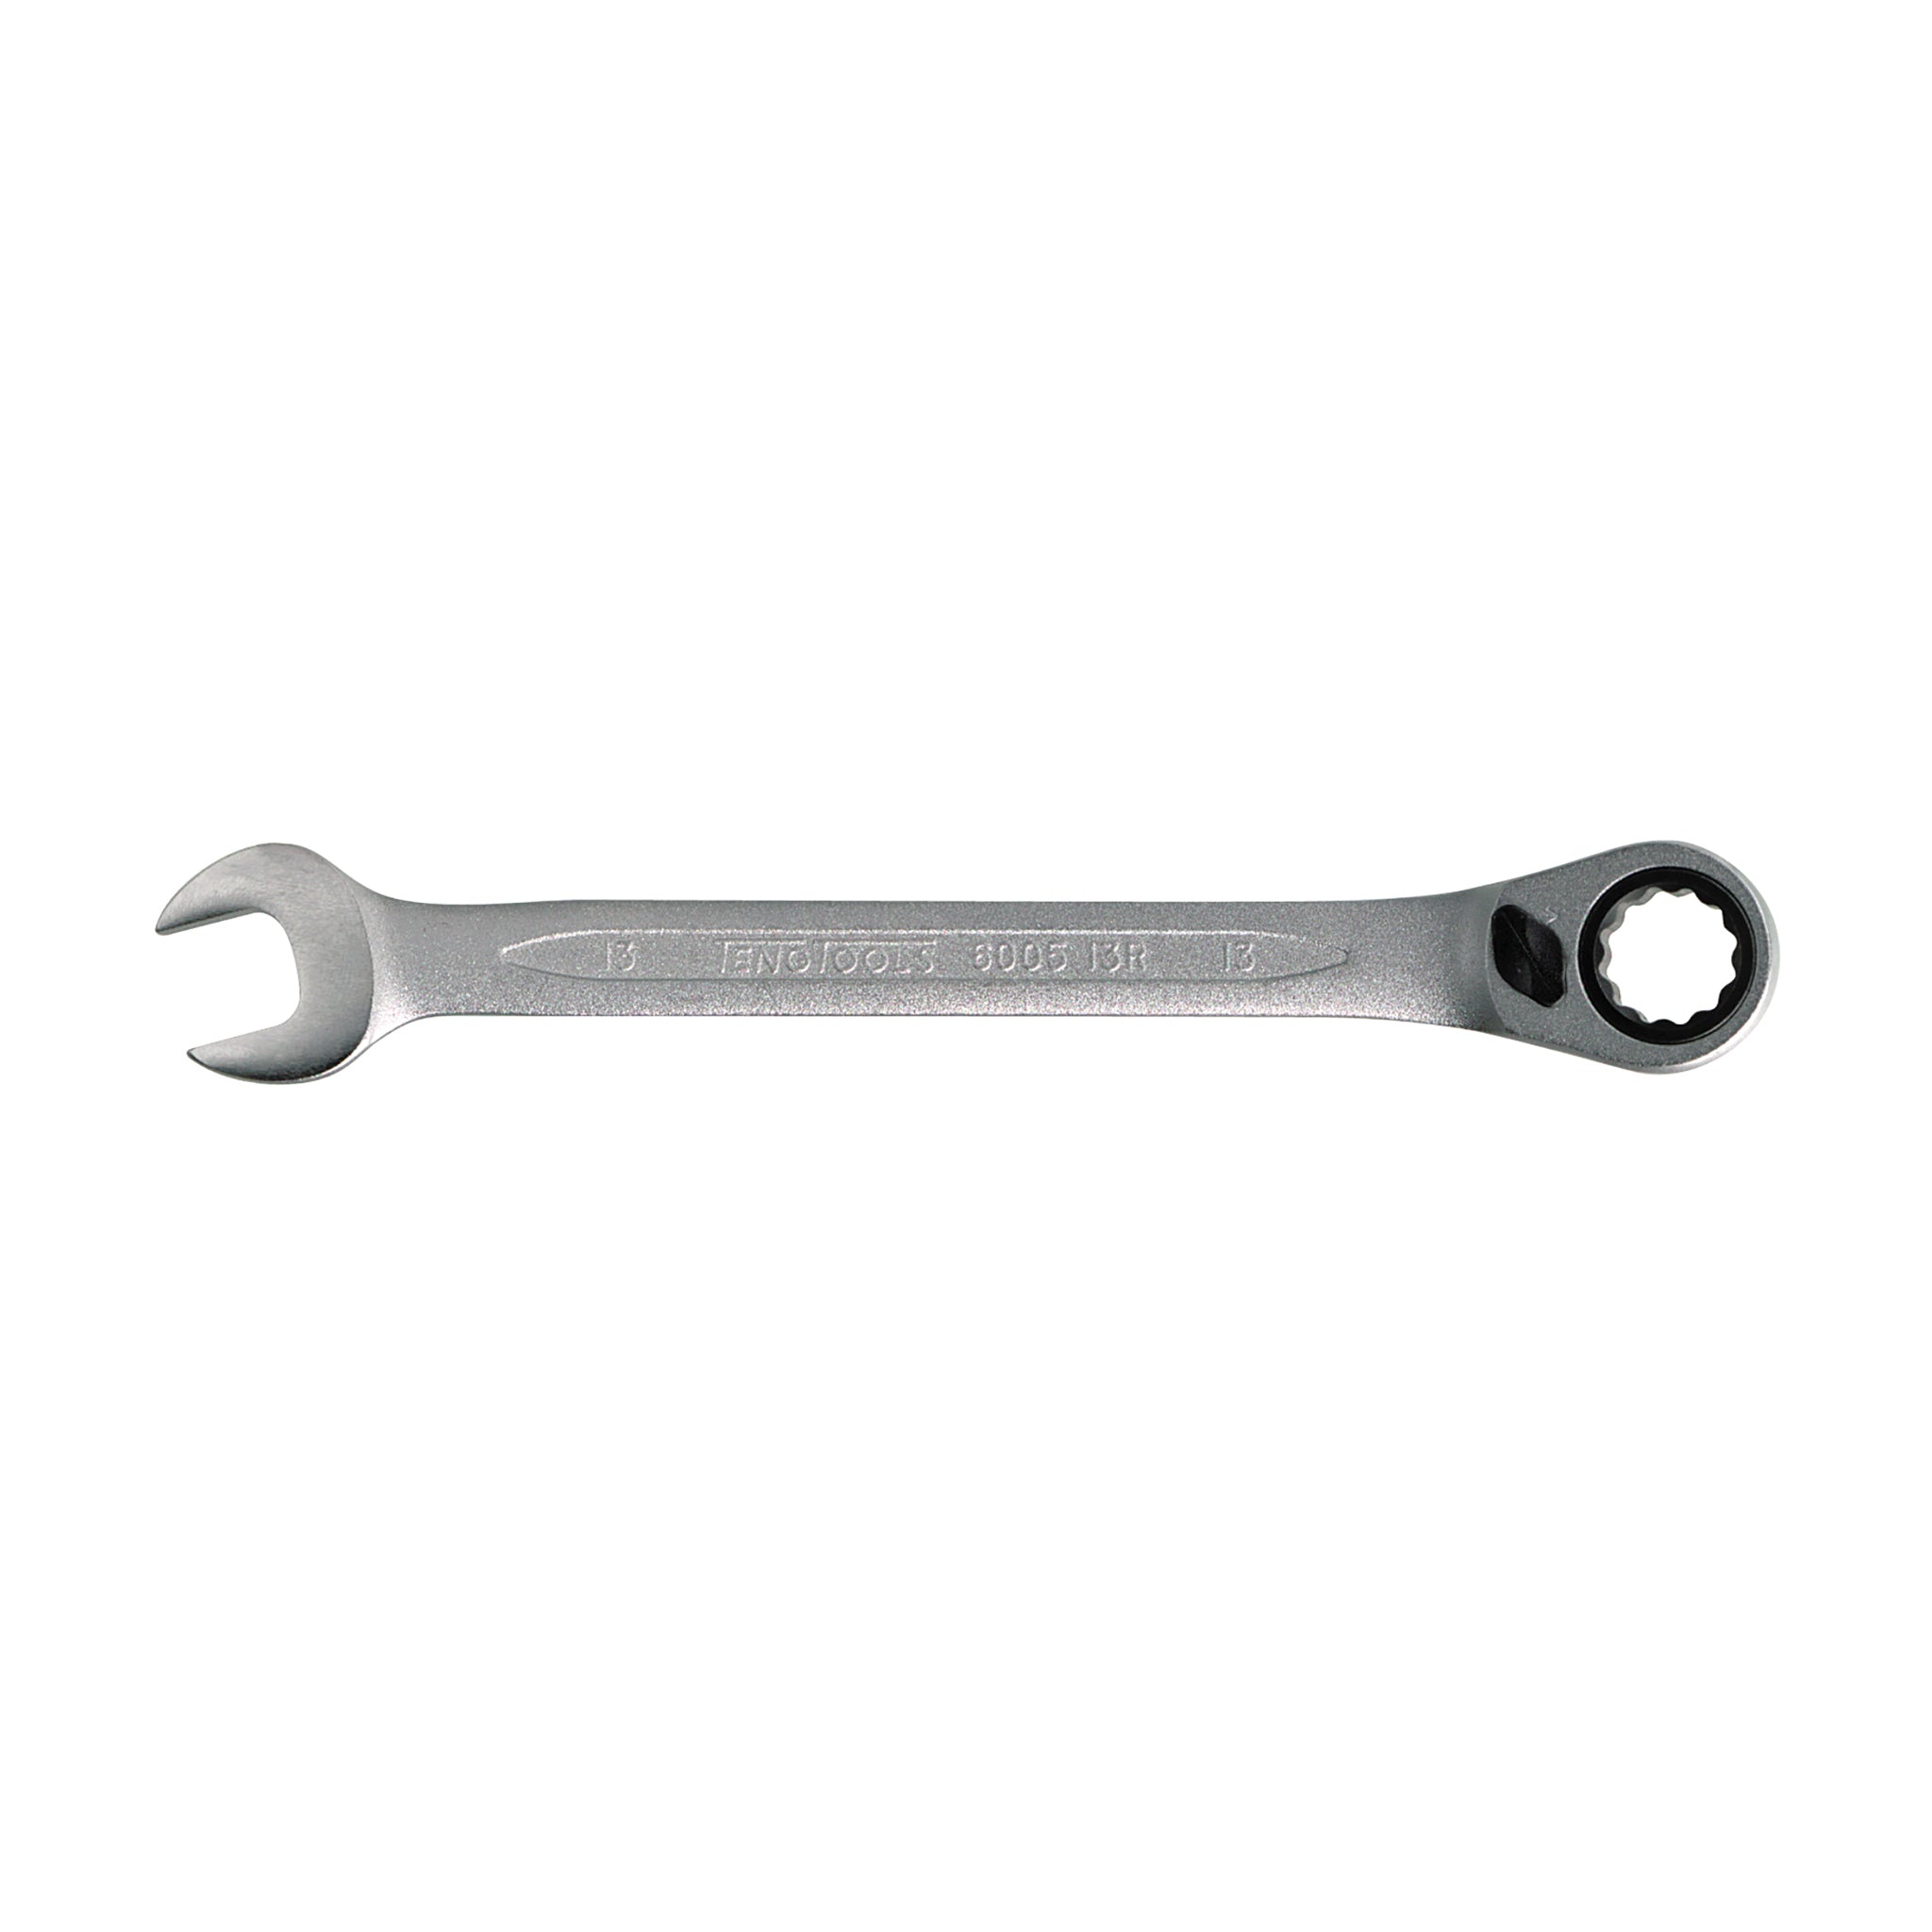 72 Teeth Ratchet Combination Metric Wrenches With Flip Reverse Lever - 10mm